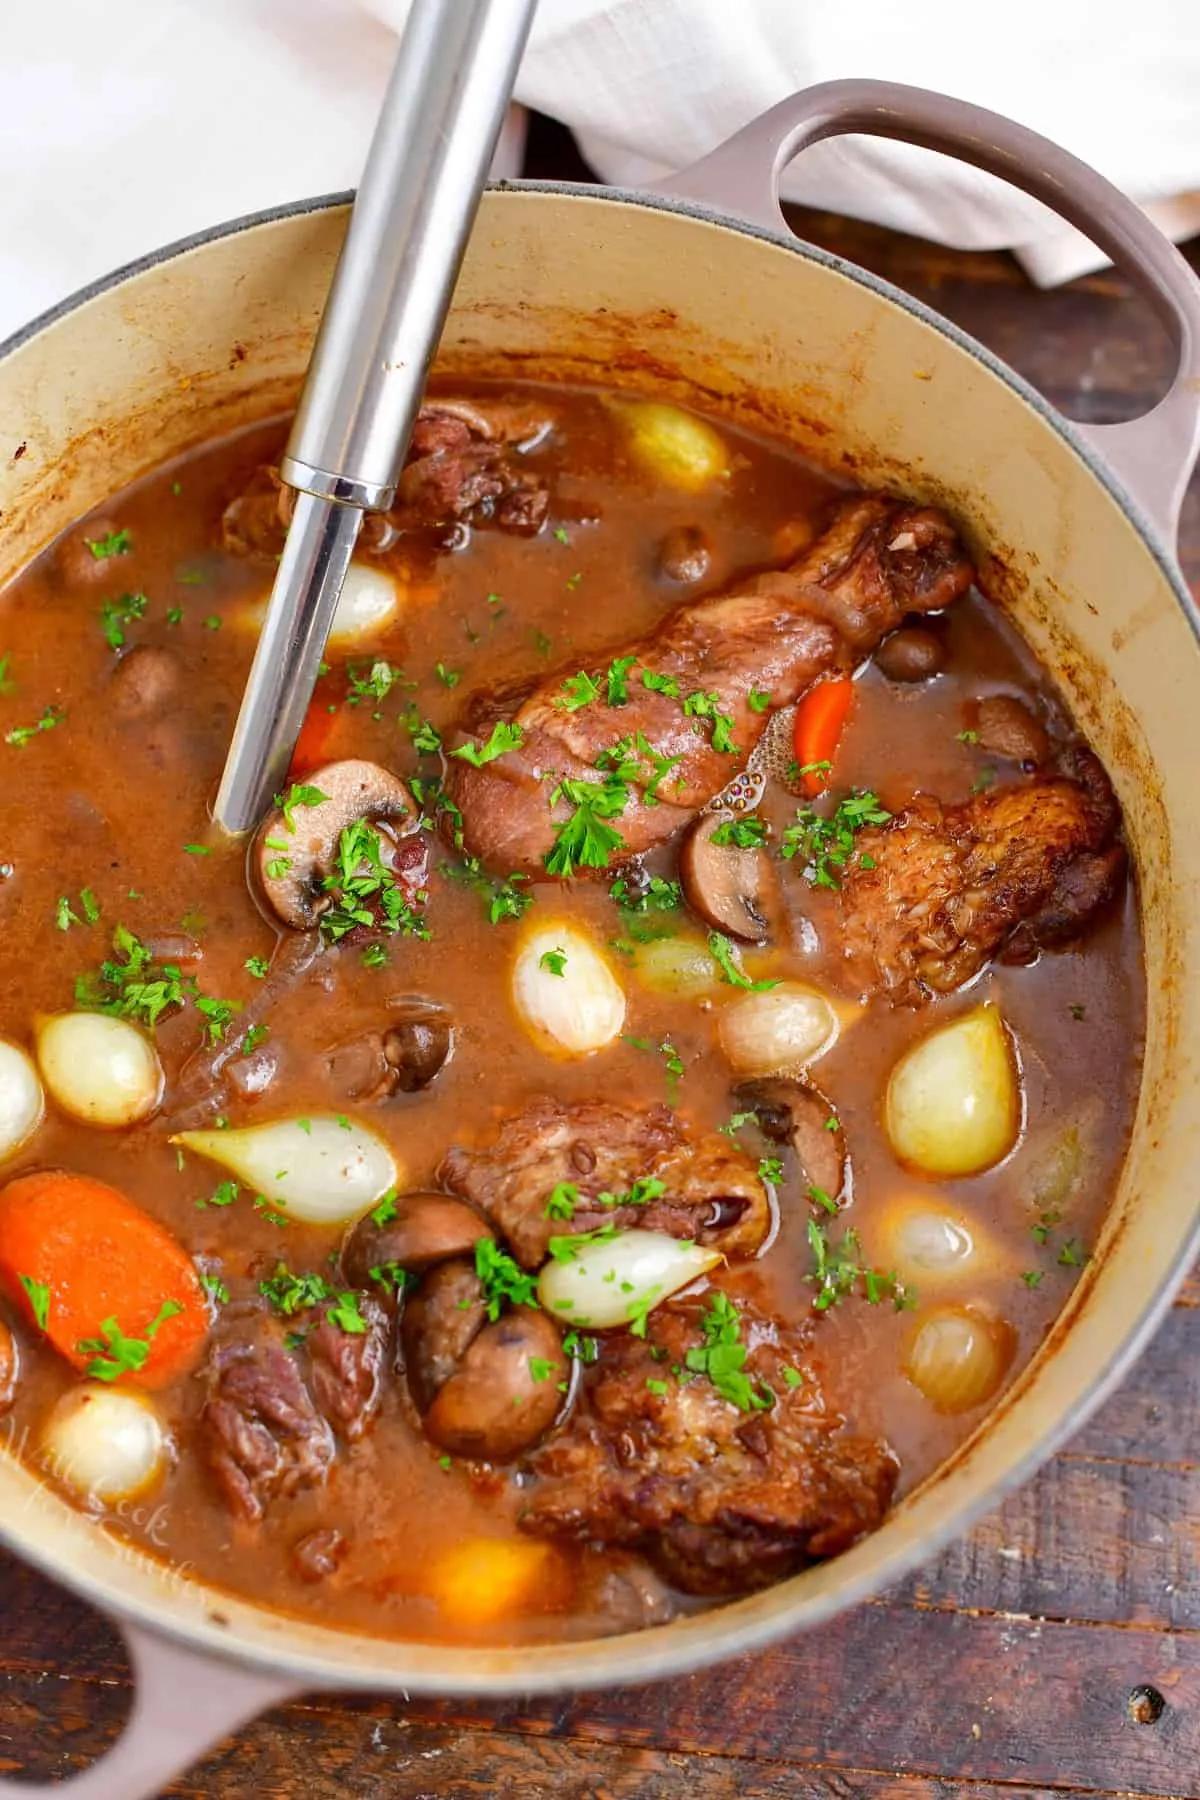 Coq Au Vin - Learn To Make This Classic French Chicken Recipe At Home!